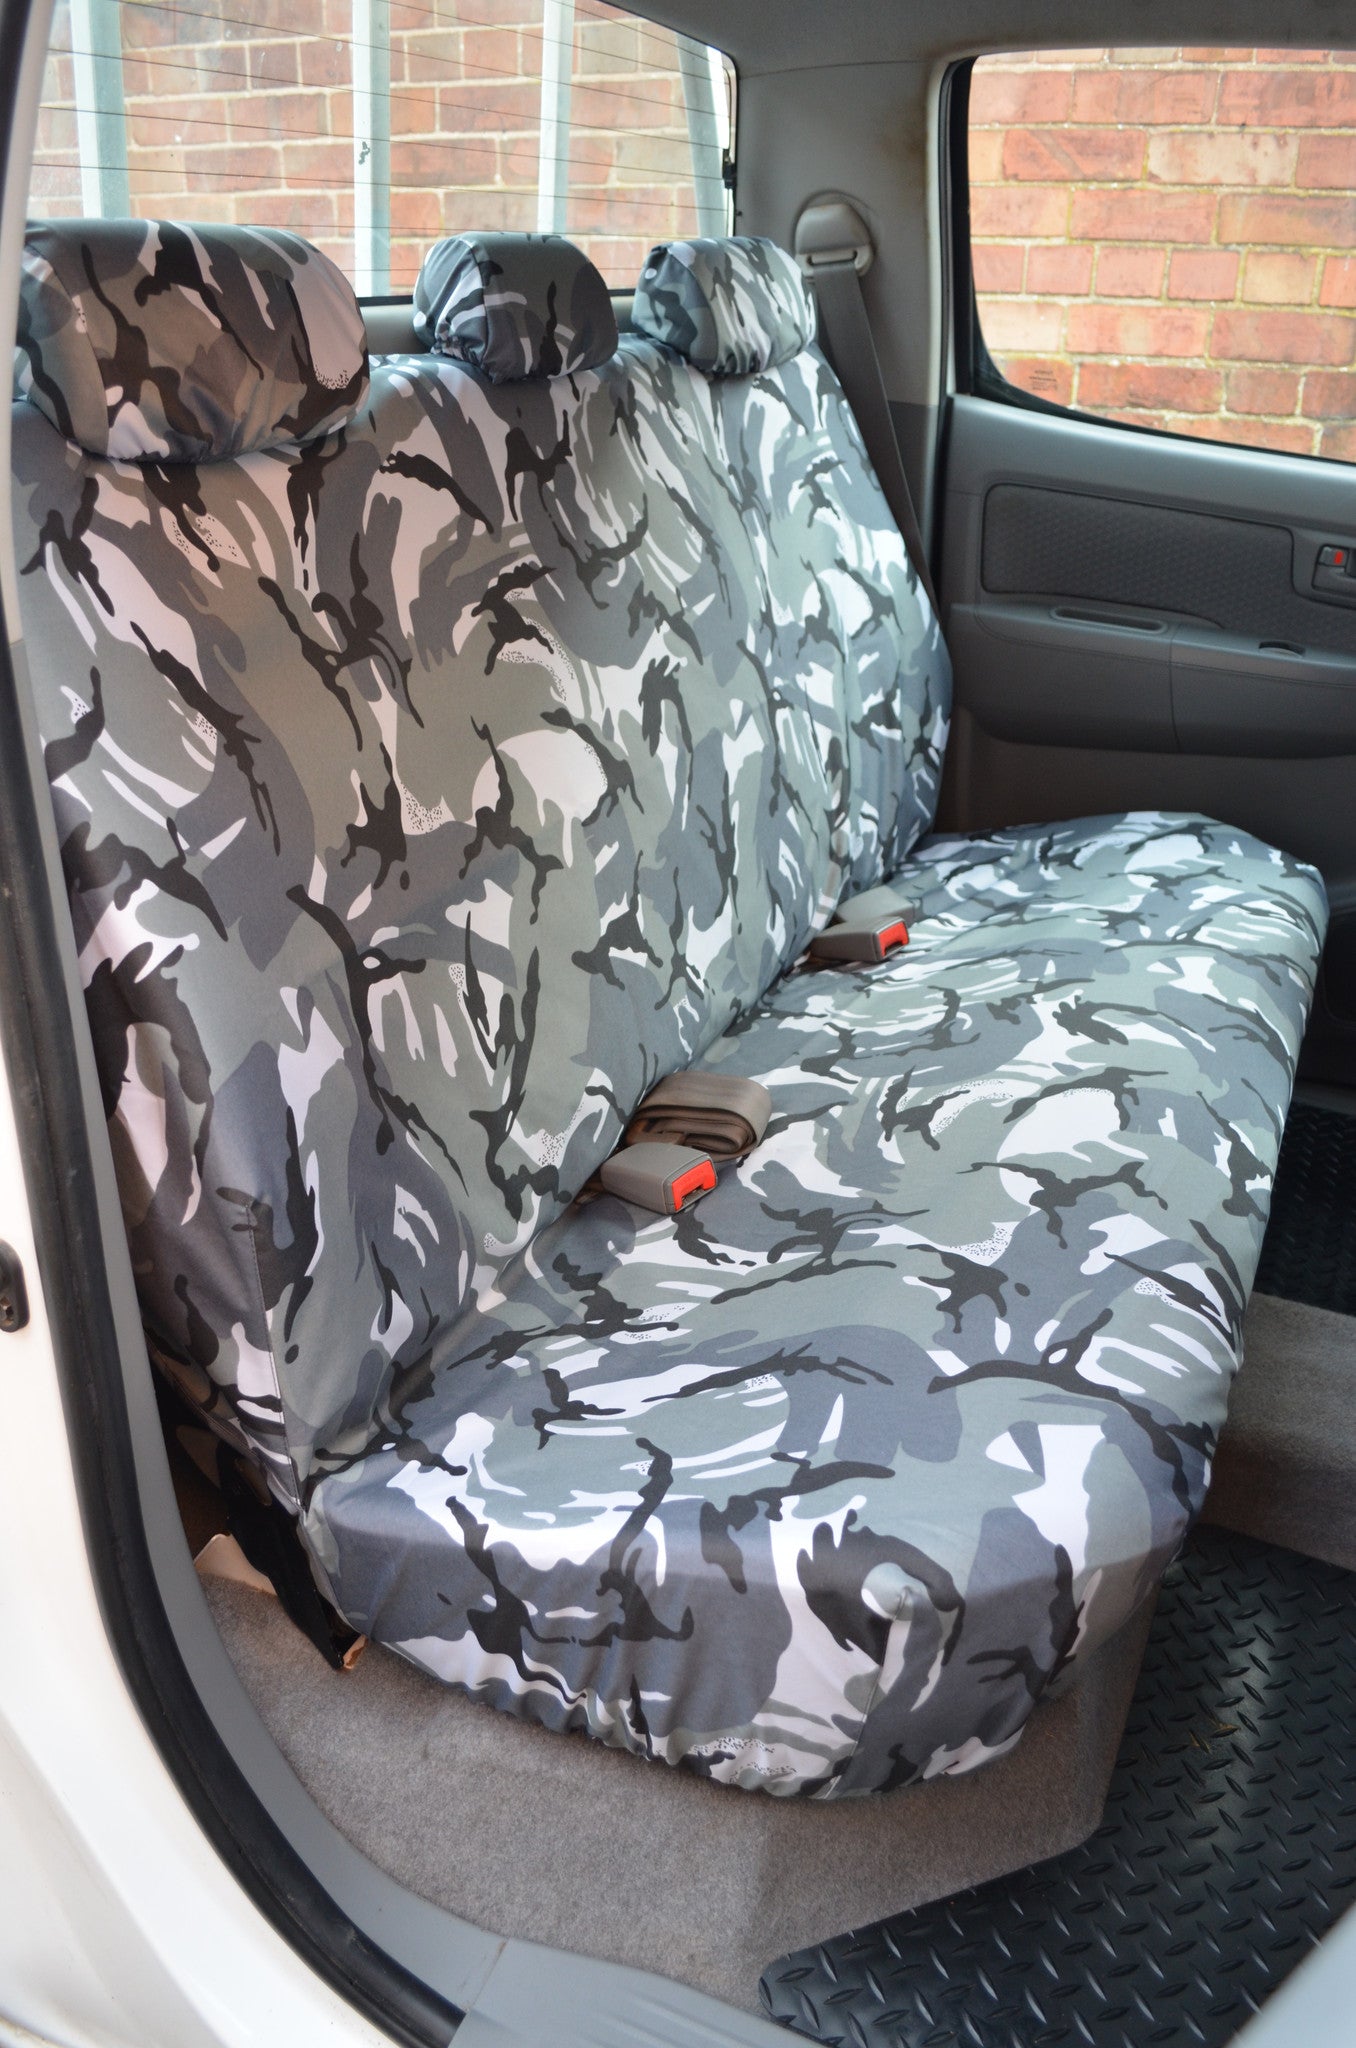 Toyota Hilux 2005 - 2016 Seat Covers Double Cab Rear / Urban Camouflage Turtle Covers Ltd